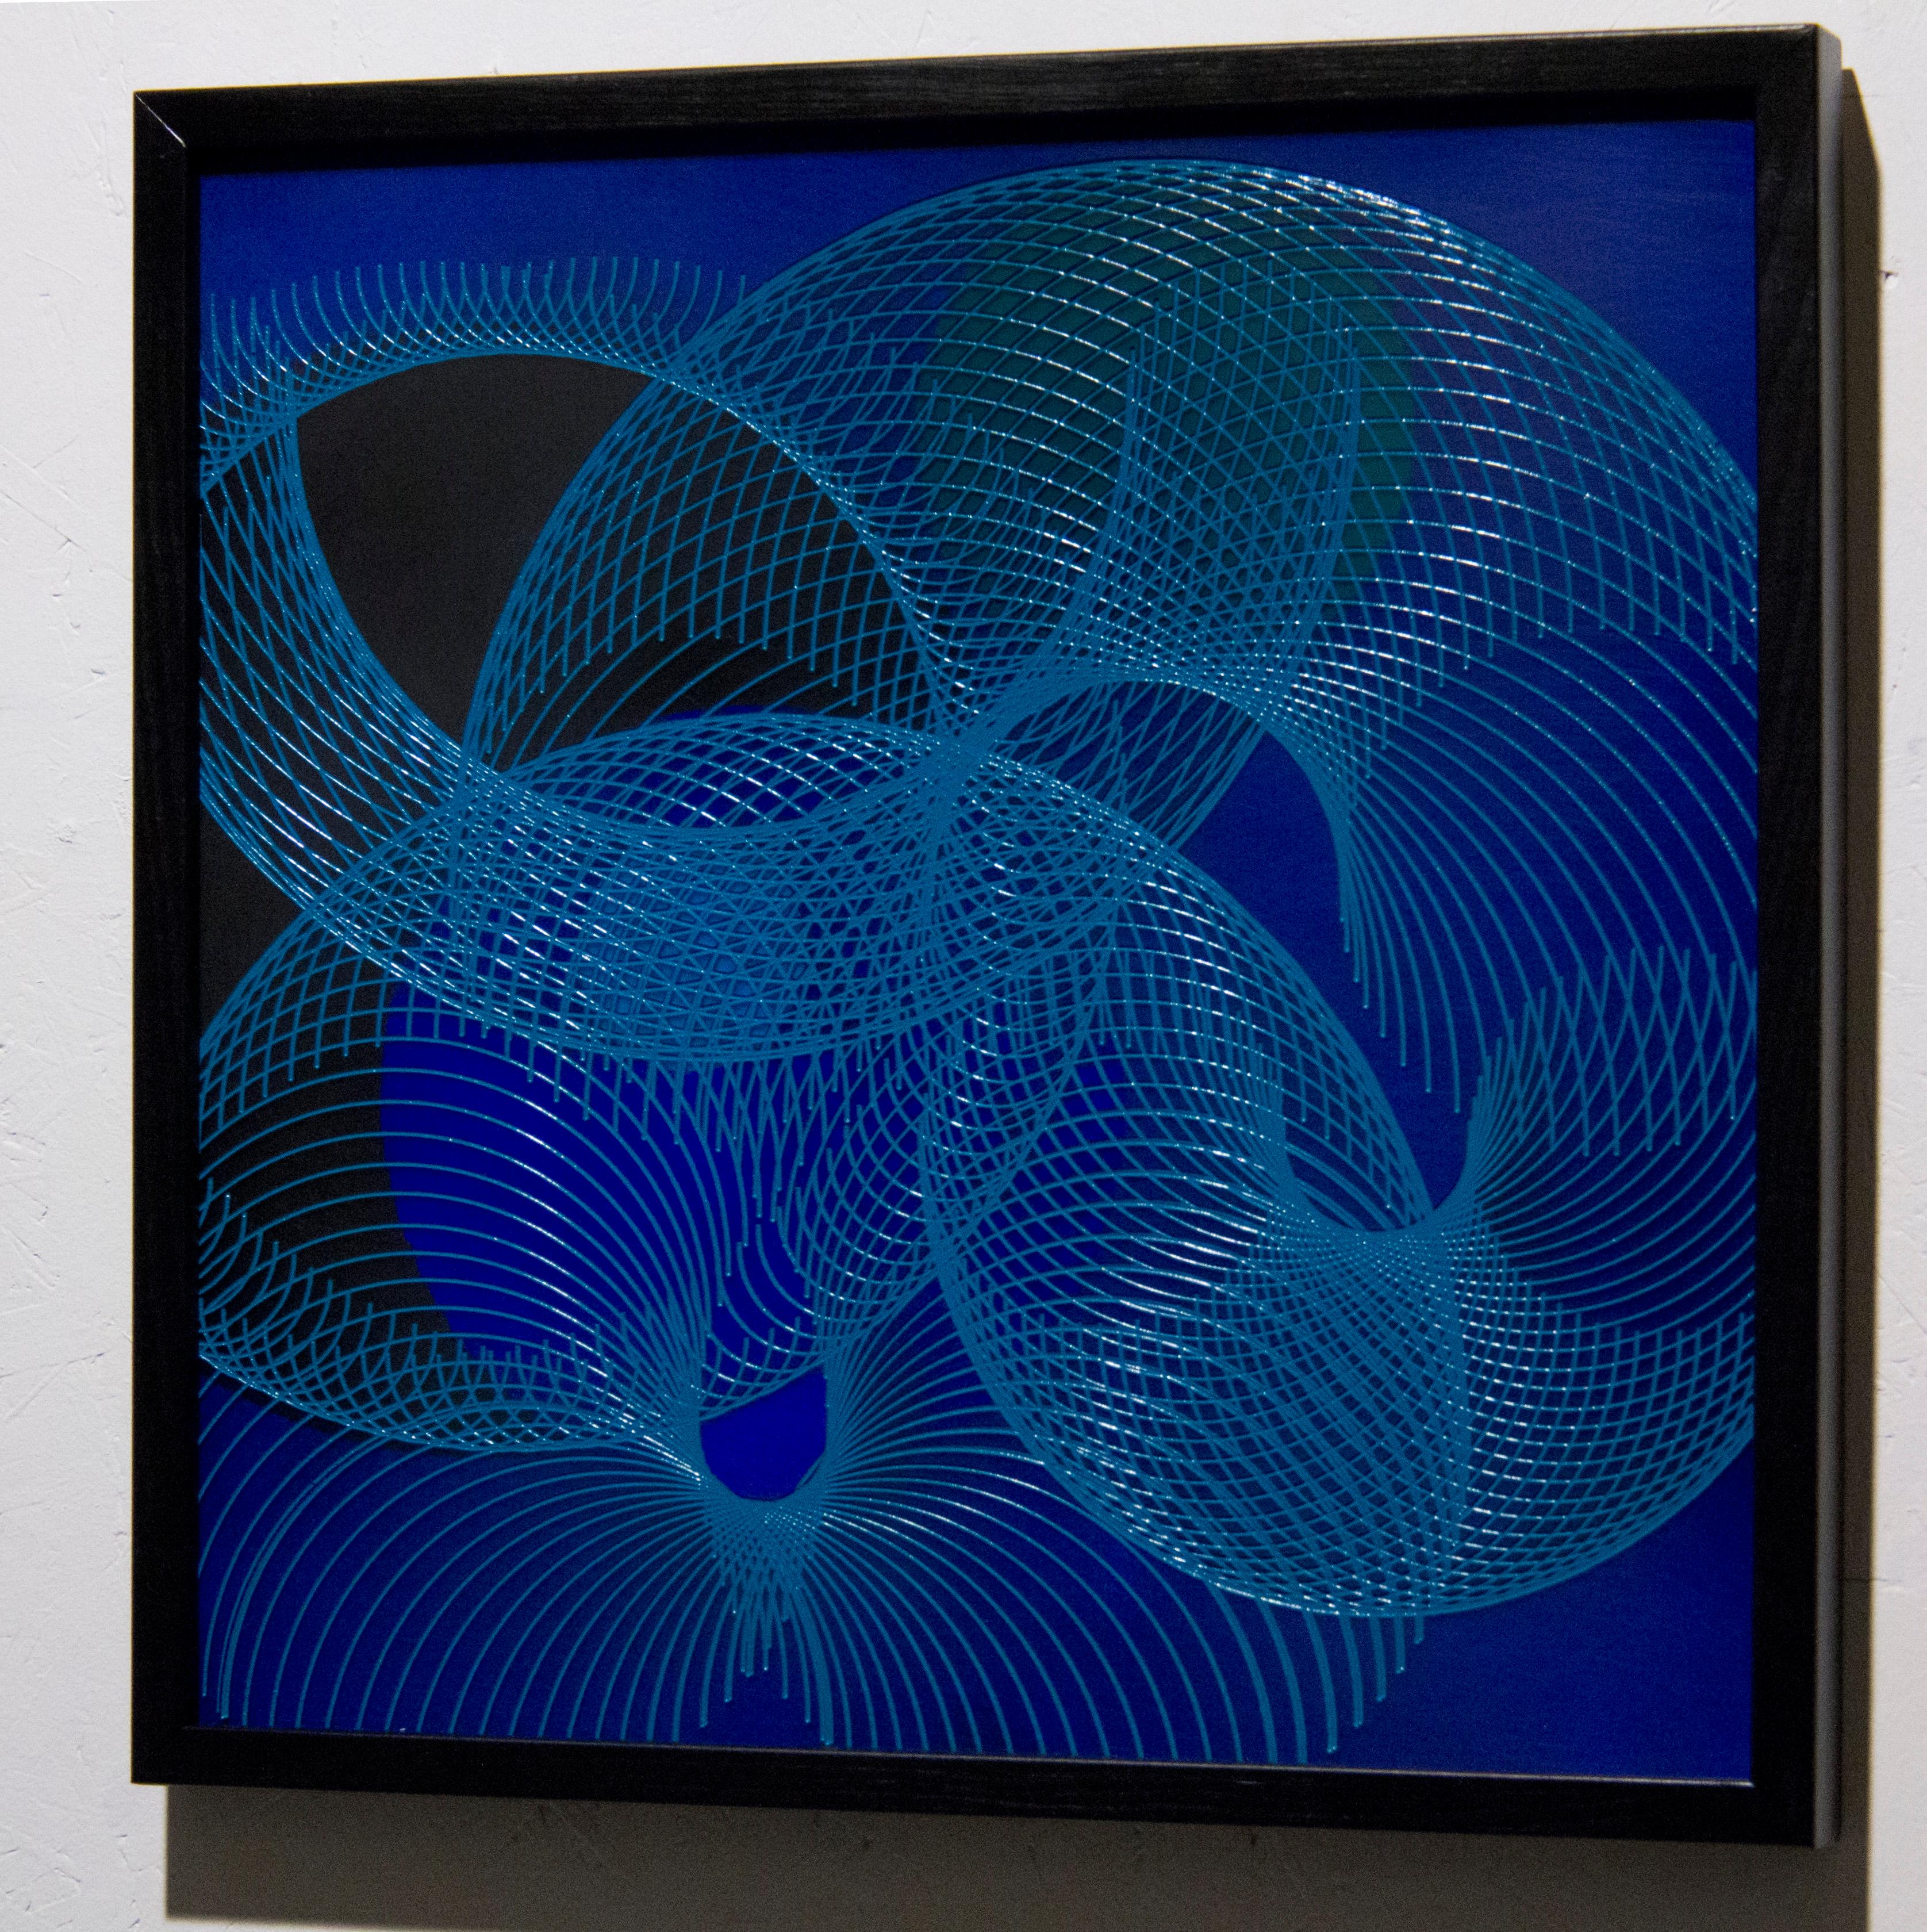 51906- blue circle abstract geometric holographic light drawing on wood panel - Abstract Geometric Painting by James Minden